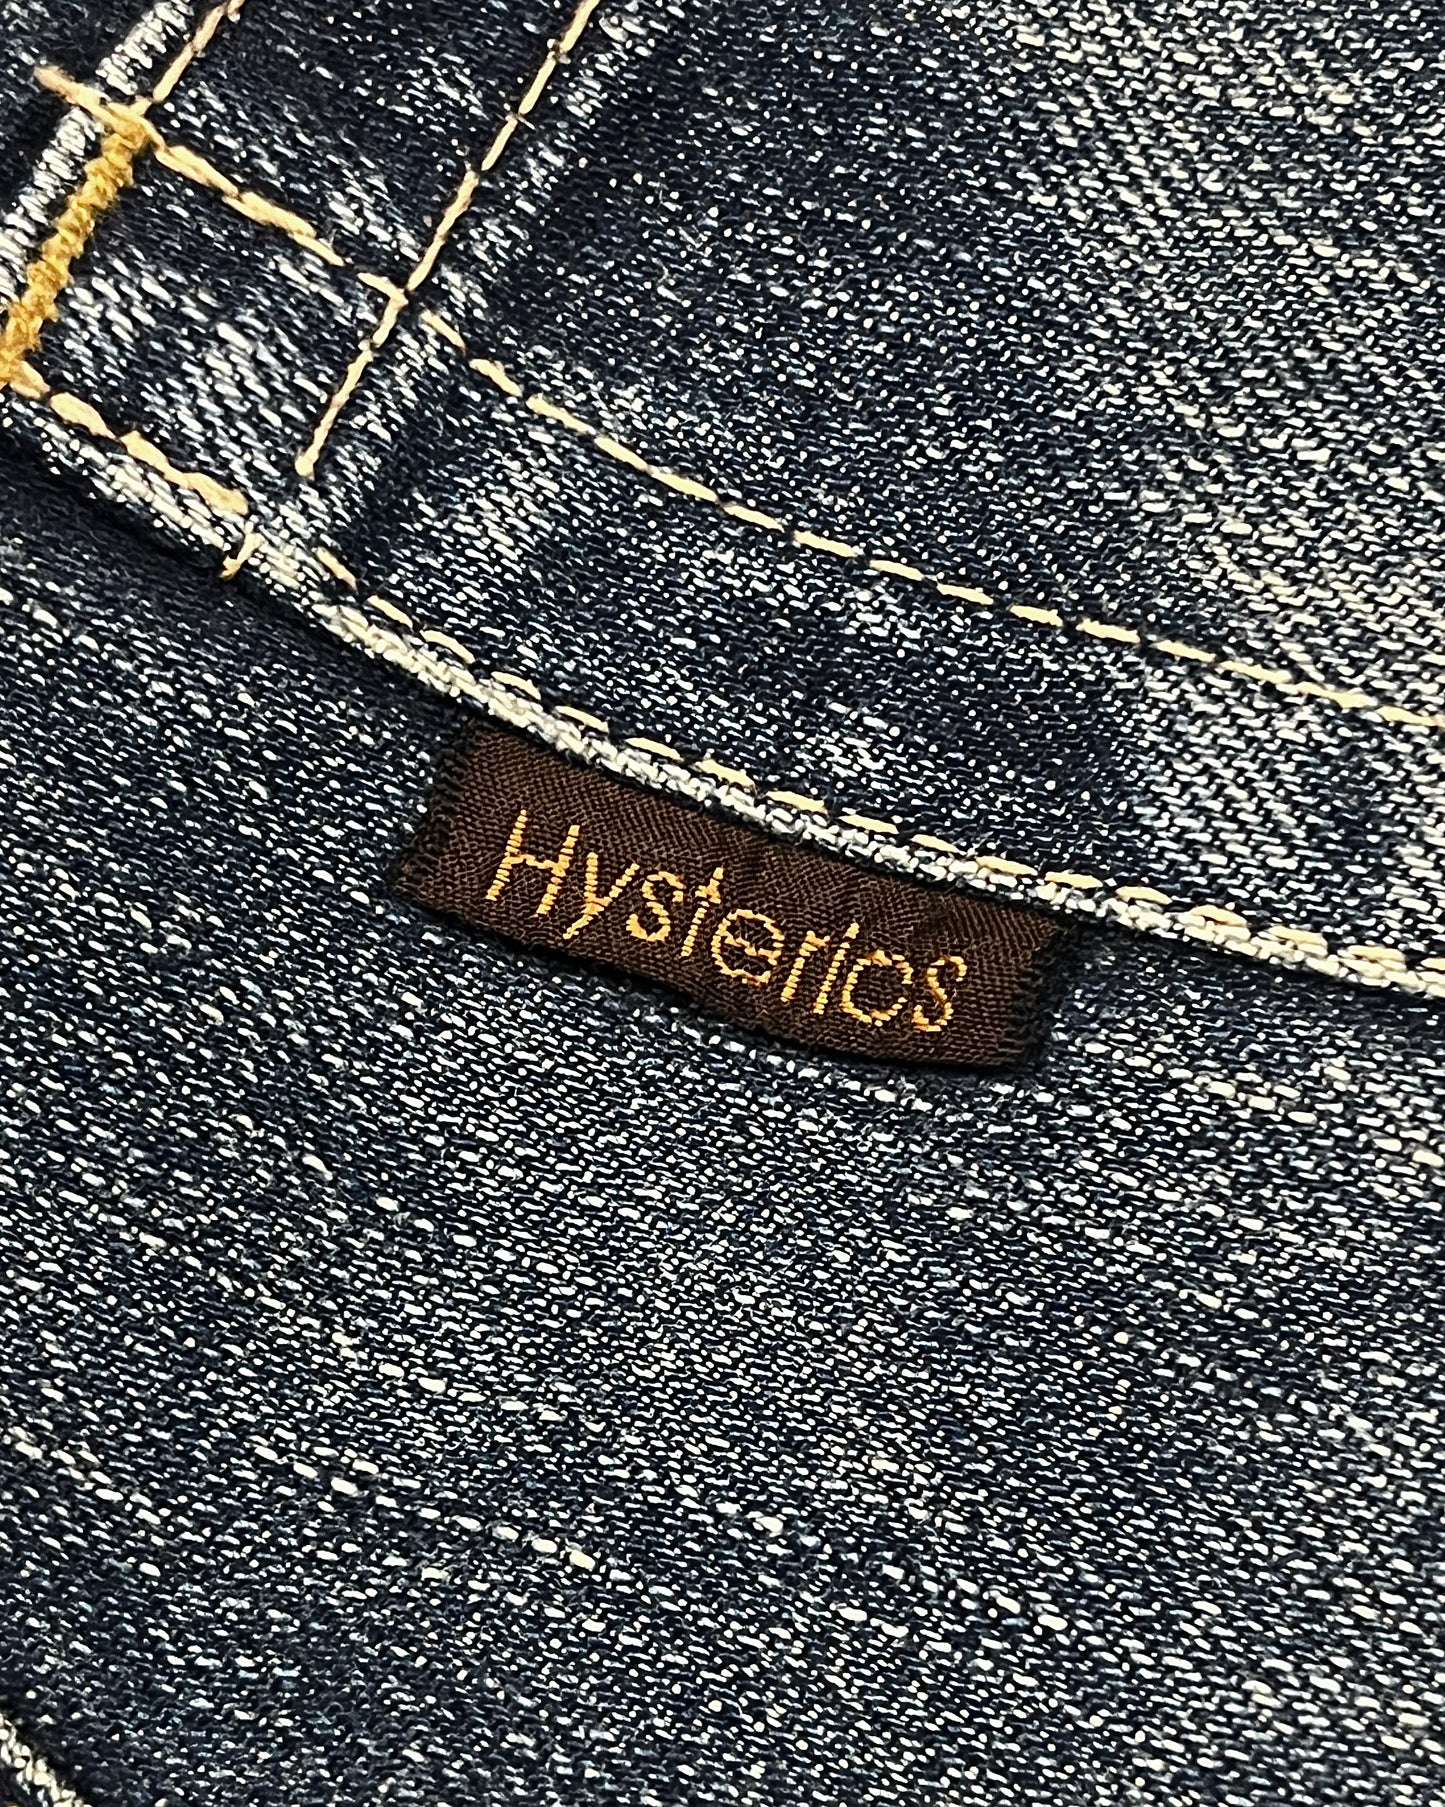 Hysteric Glamour Waist Belt Flared Jeans